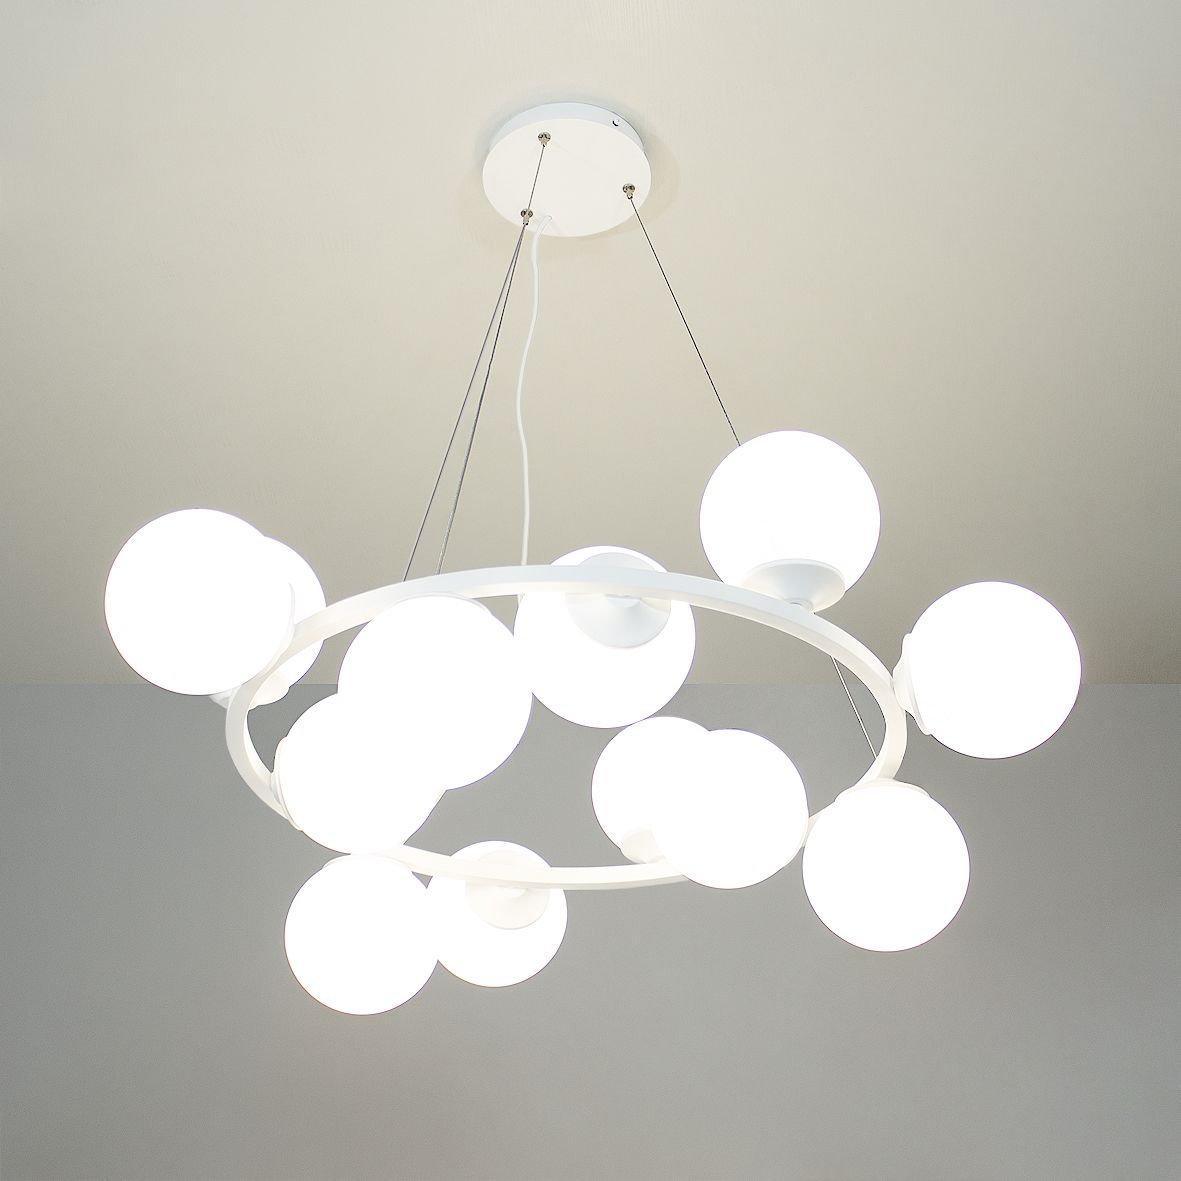 Suspension lamp Frost white